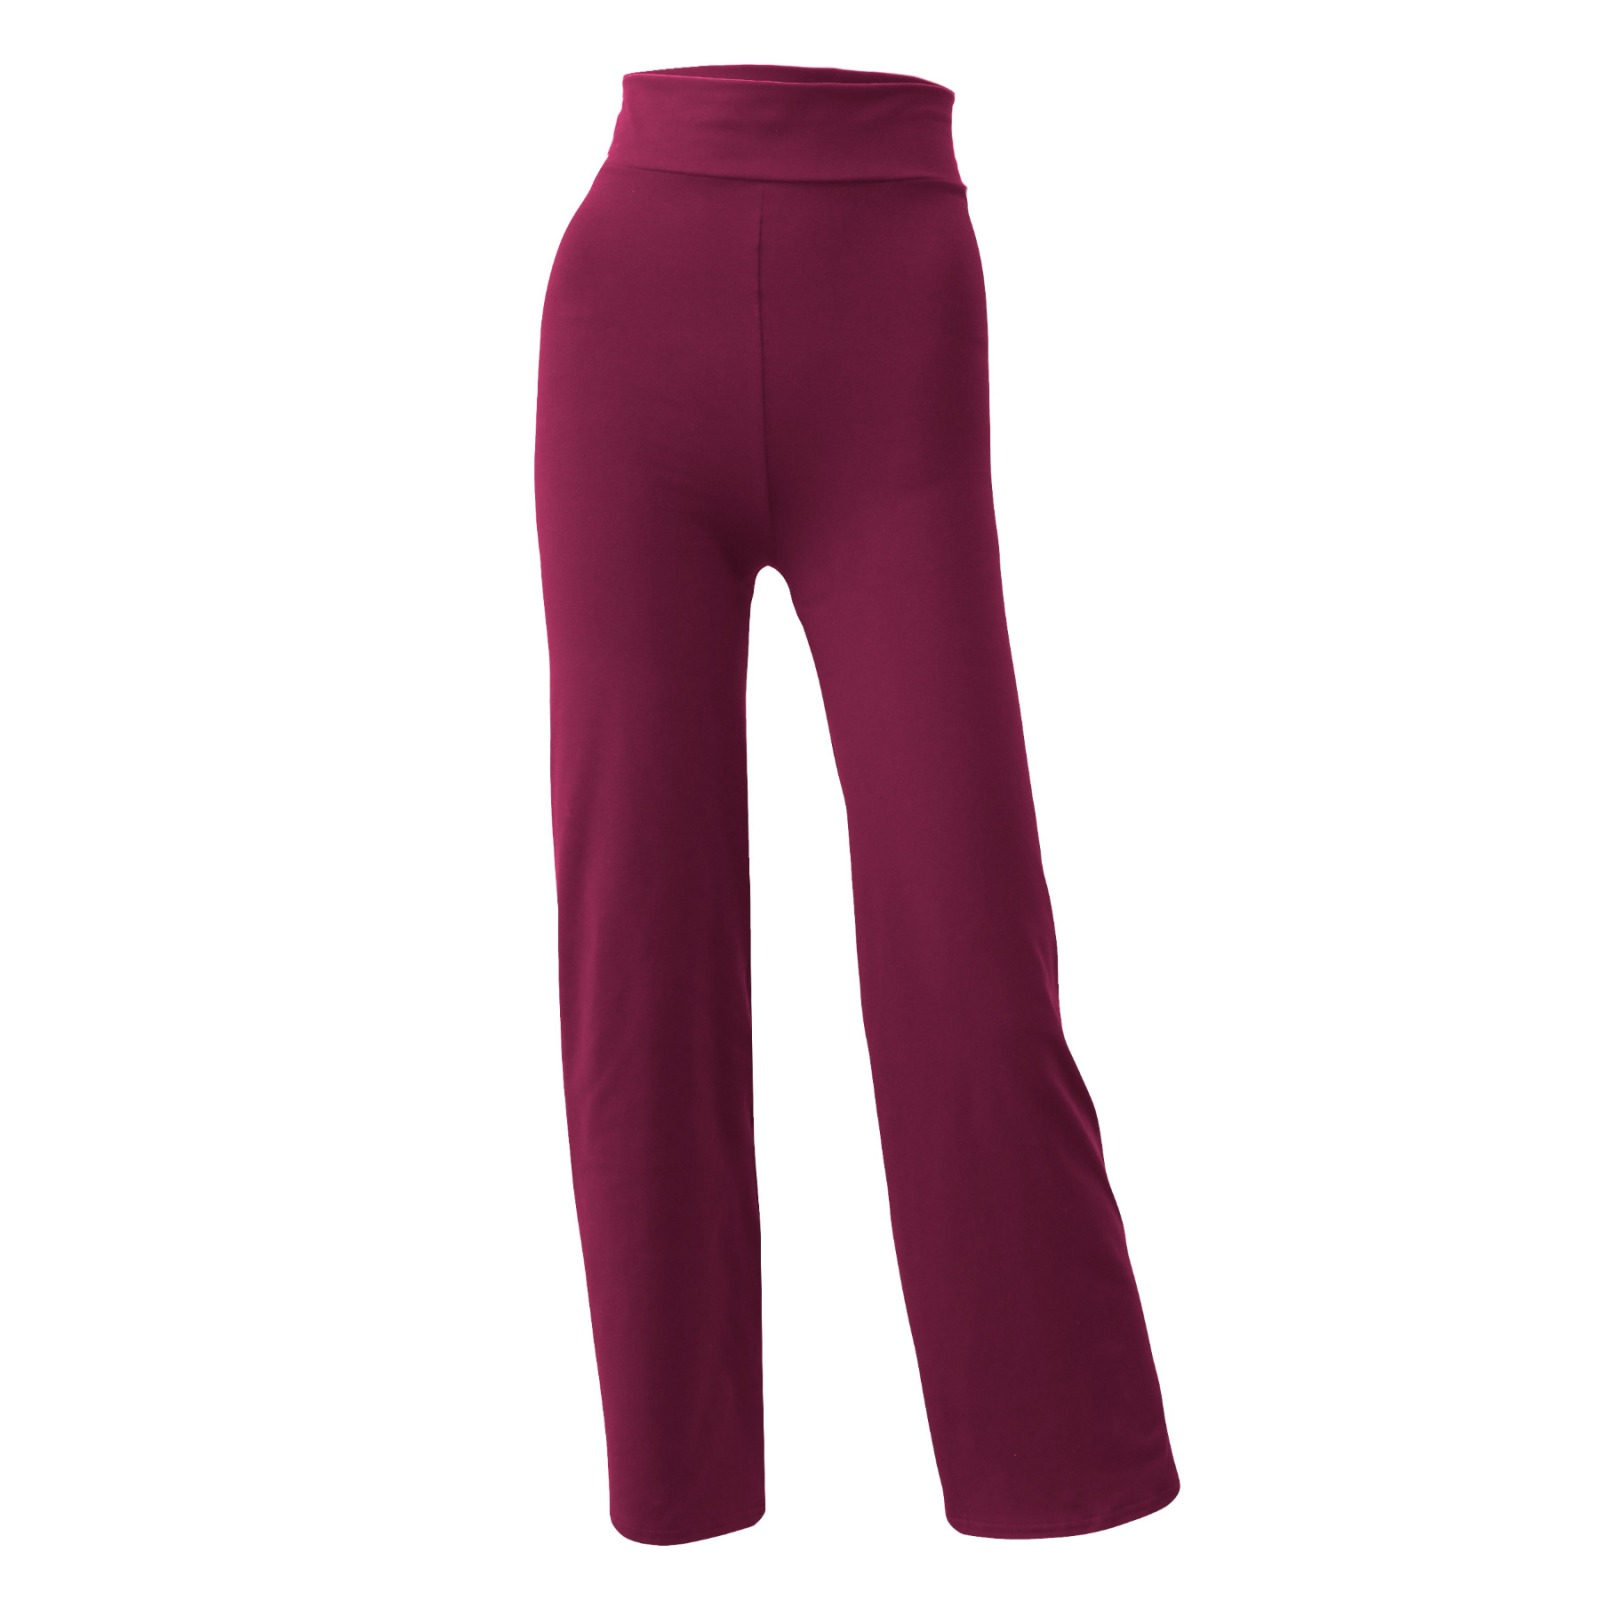 Yogahose Relaxed Fit beere rot